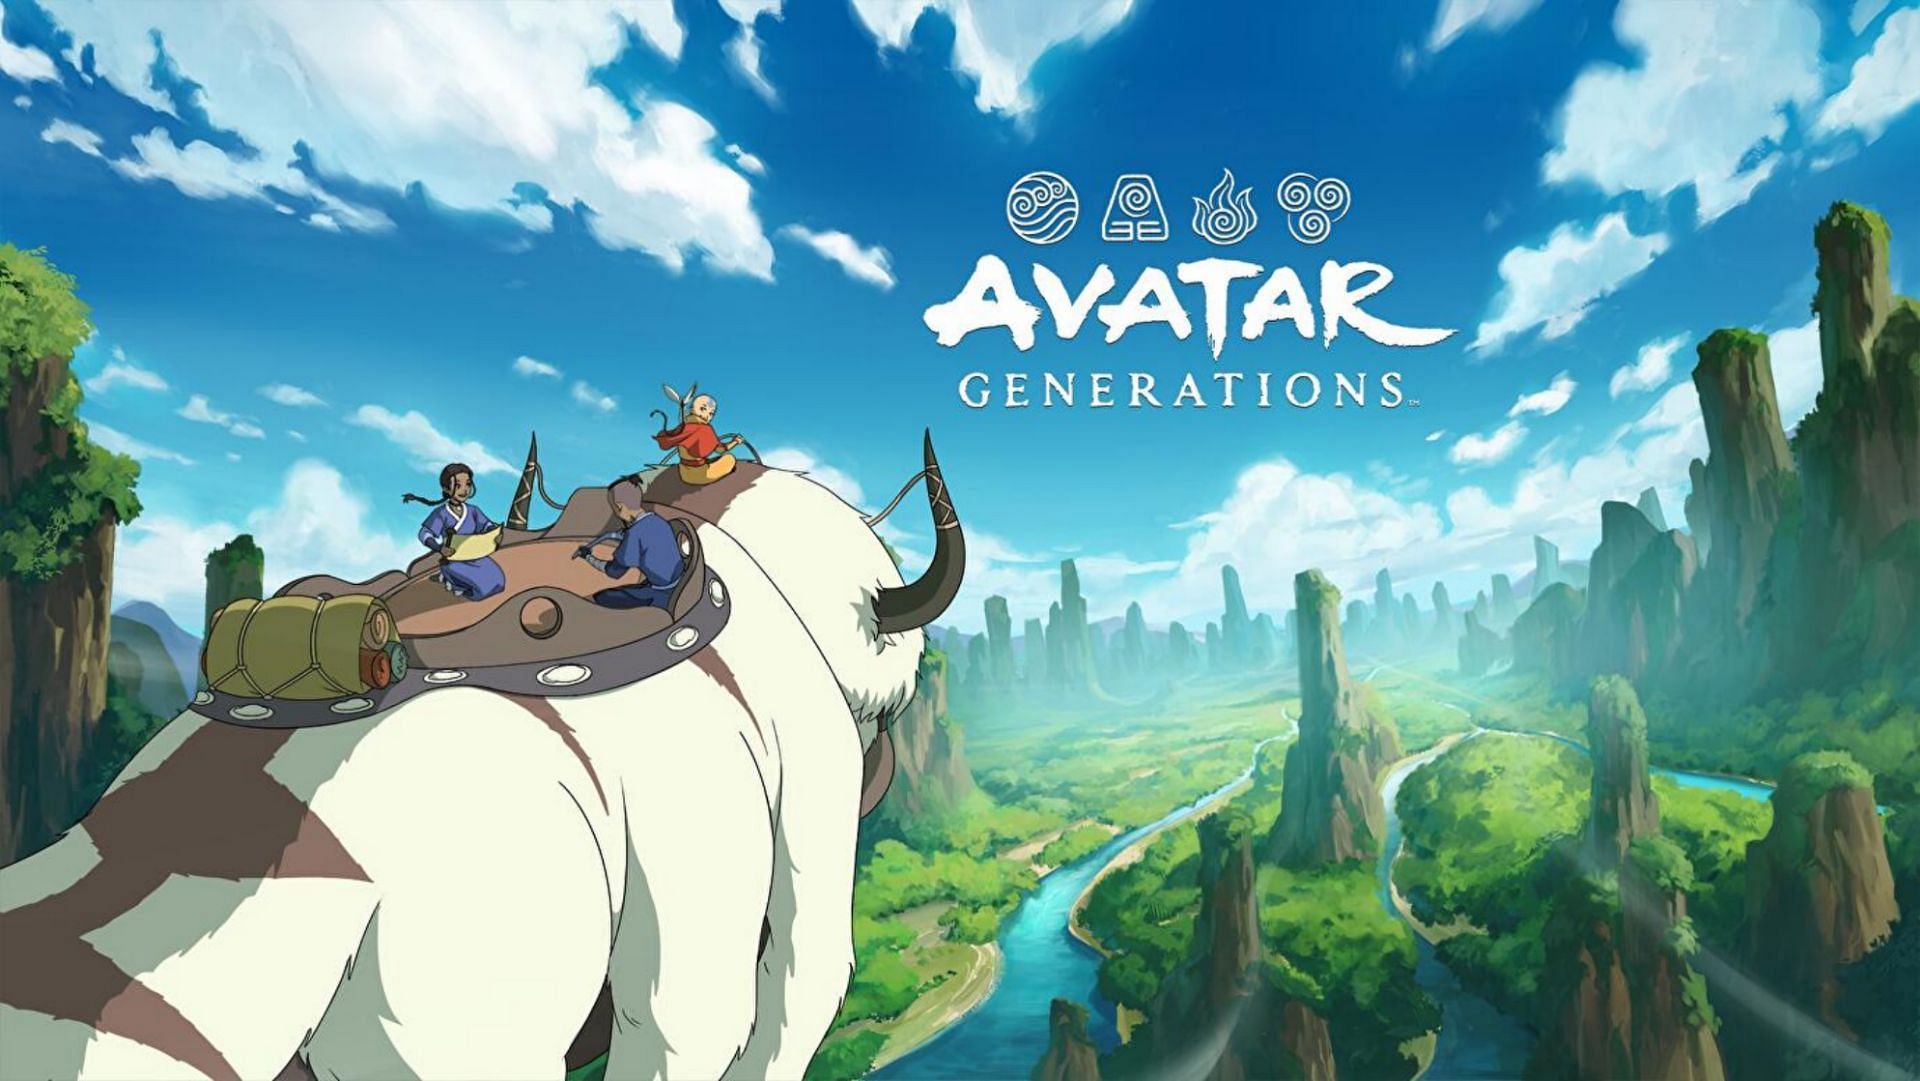 Square Enix London&#039;s second game is on the way, and it&#039;s set in the Avatar: The Last Airbender universe (Image via Square Enix London)